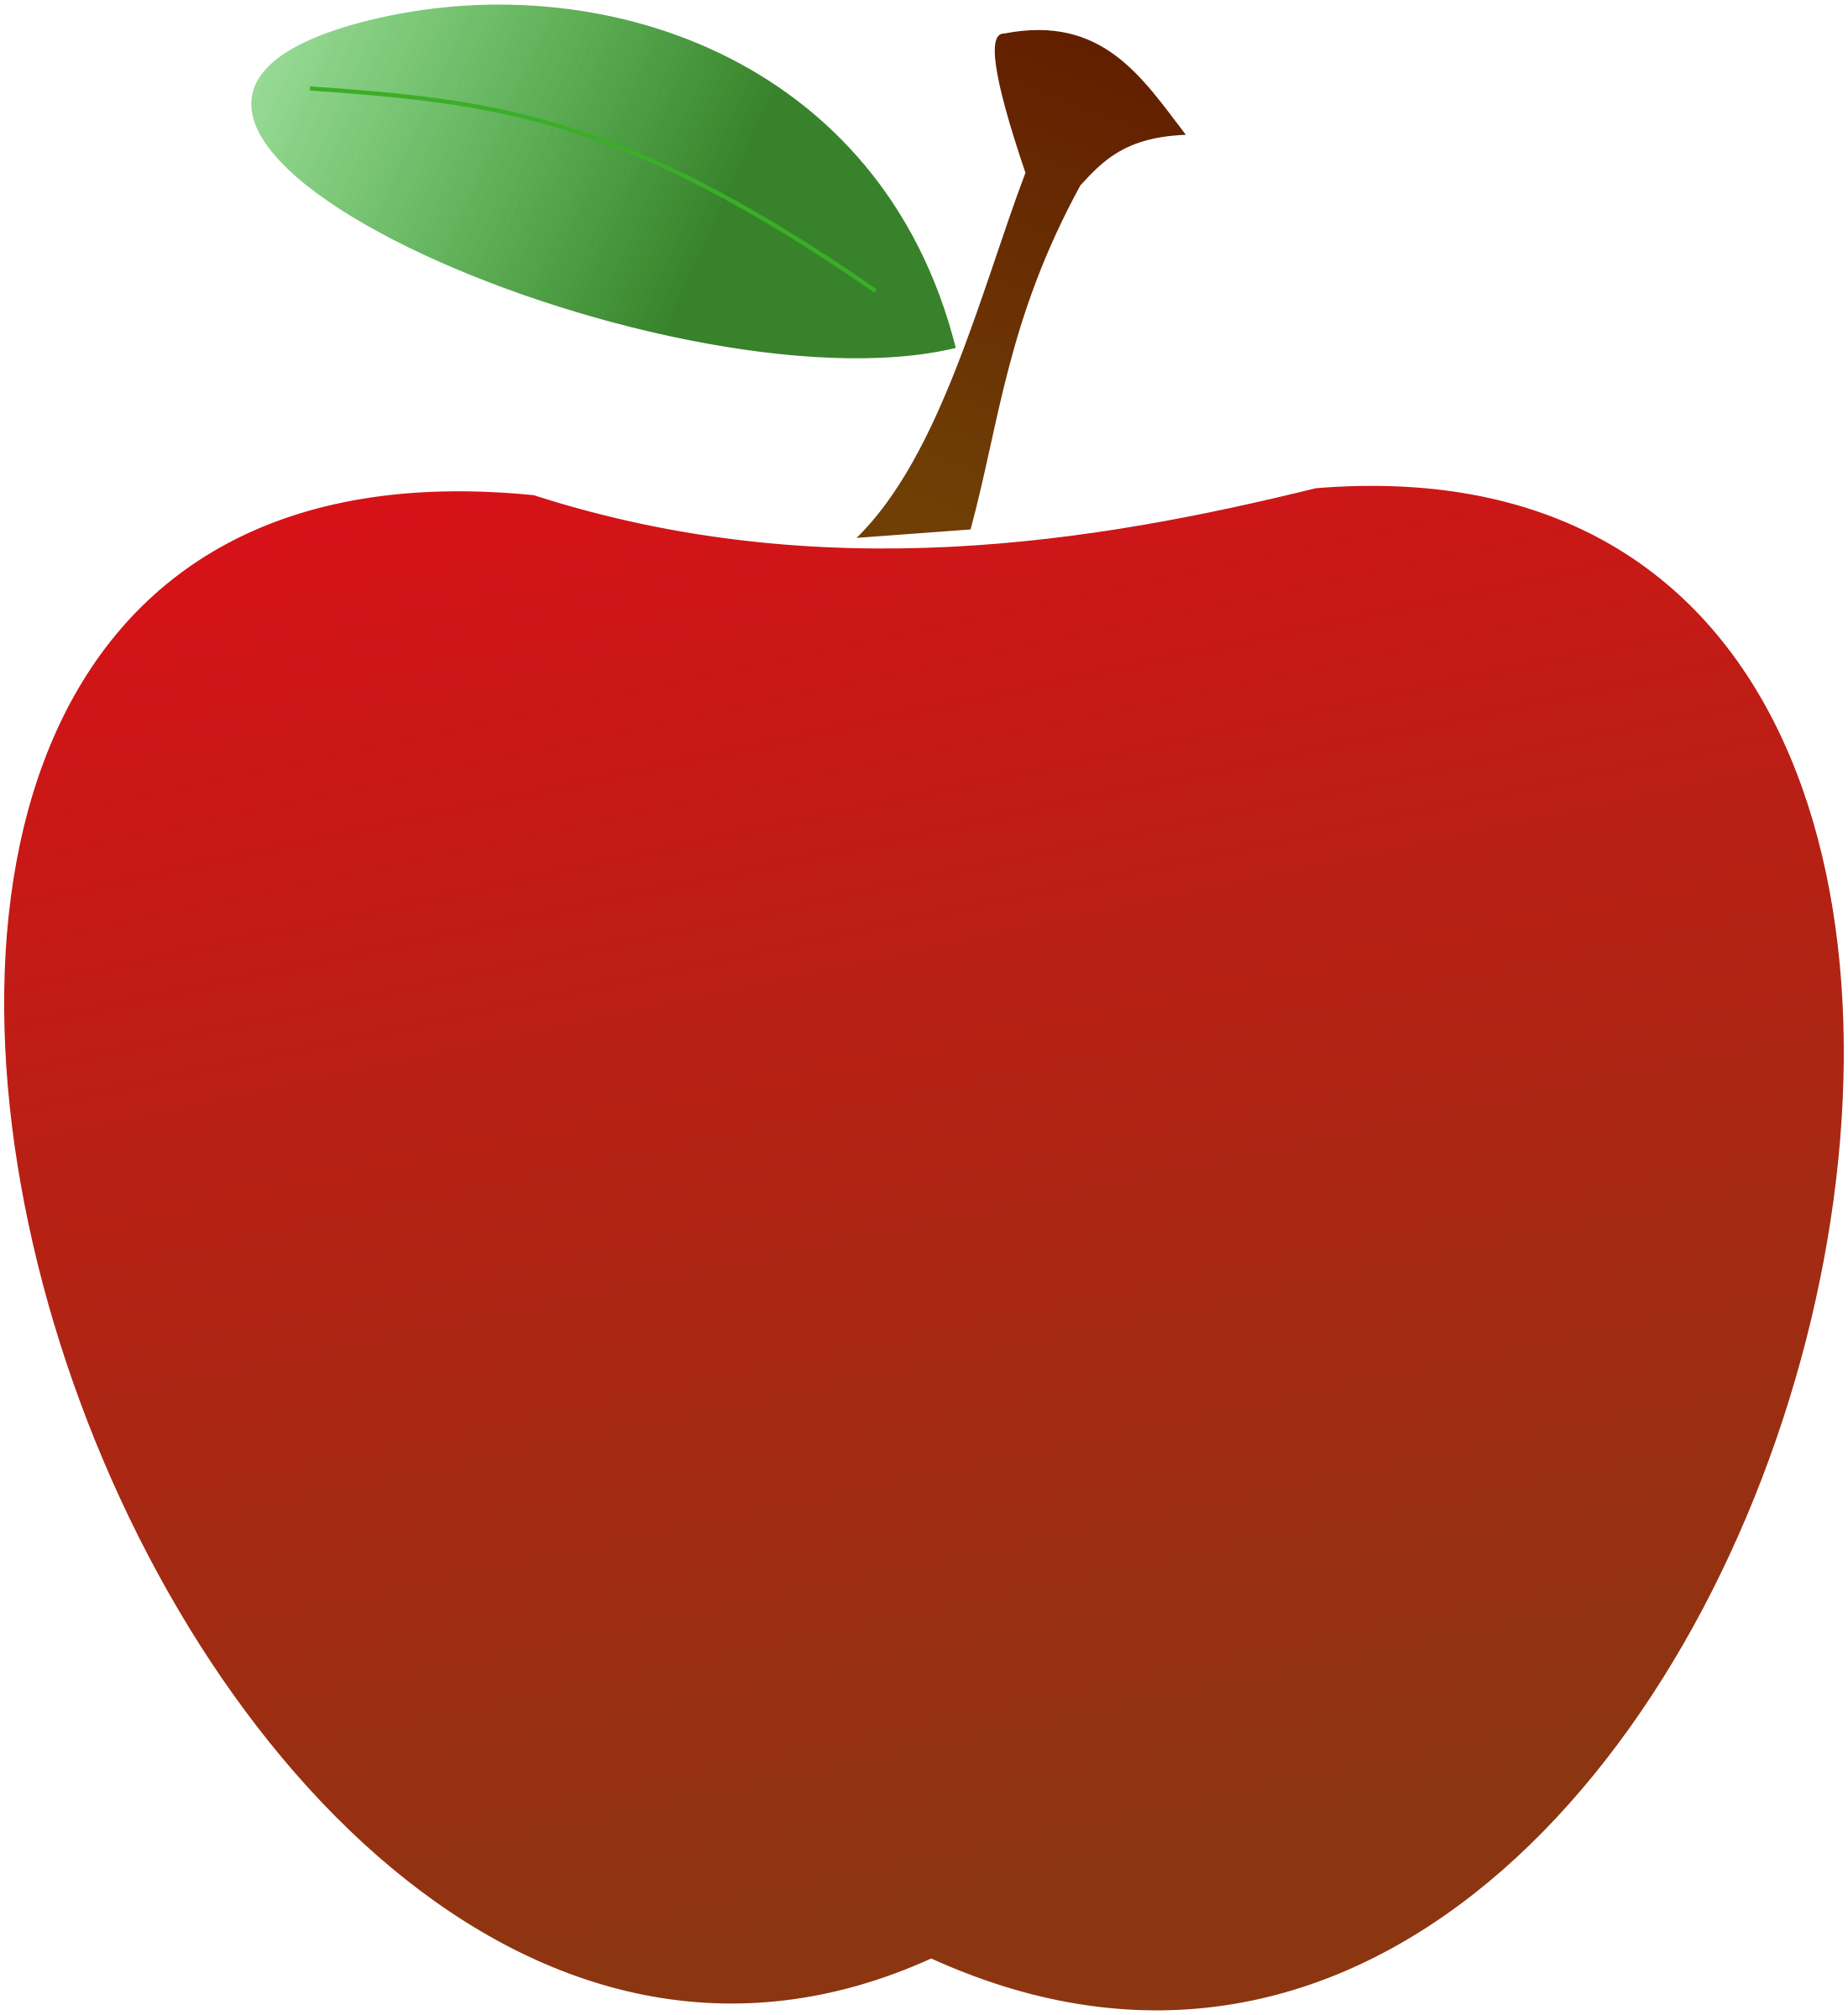 teacher-apple-clipart-free-clipart-images-2-cliparting